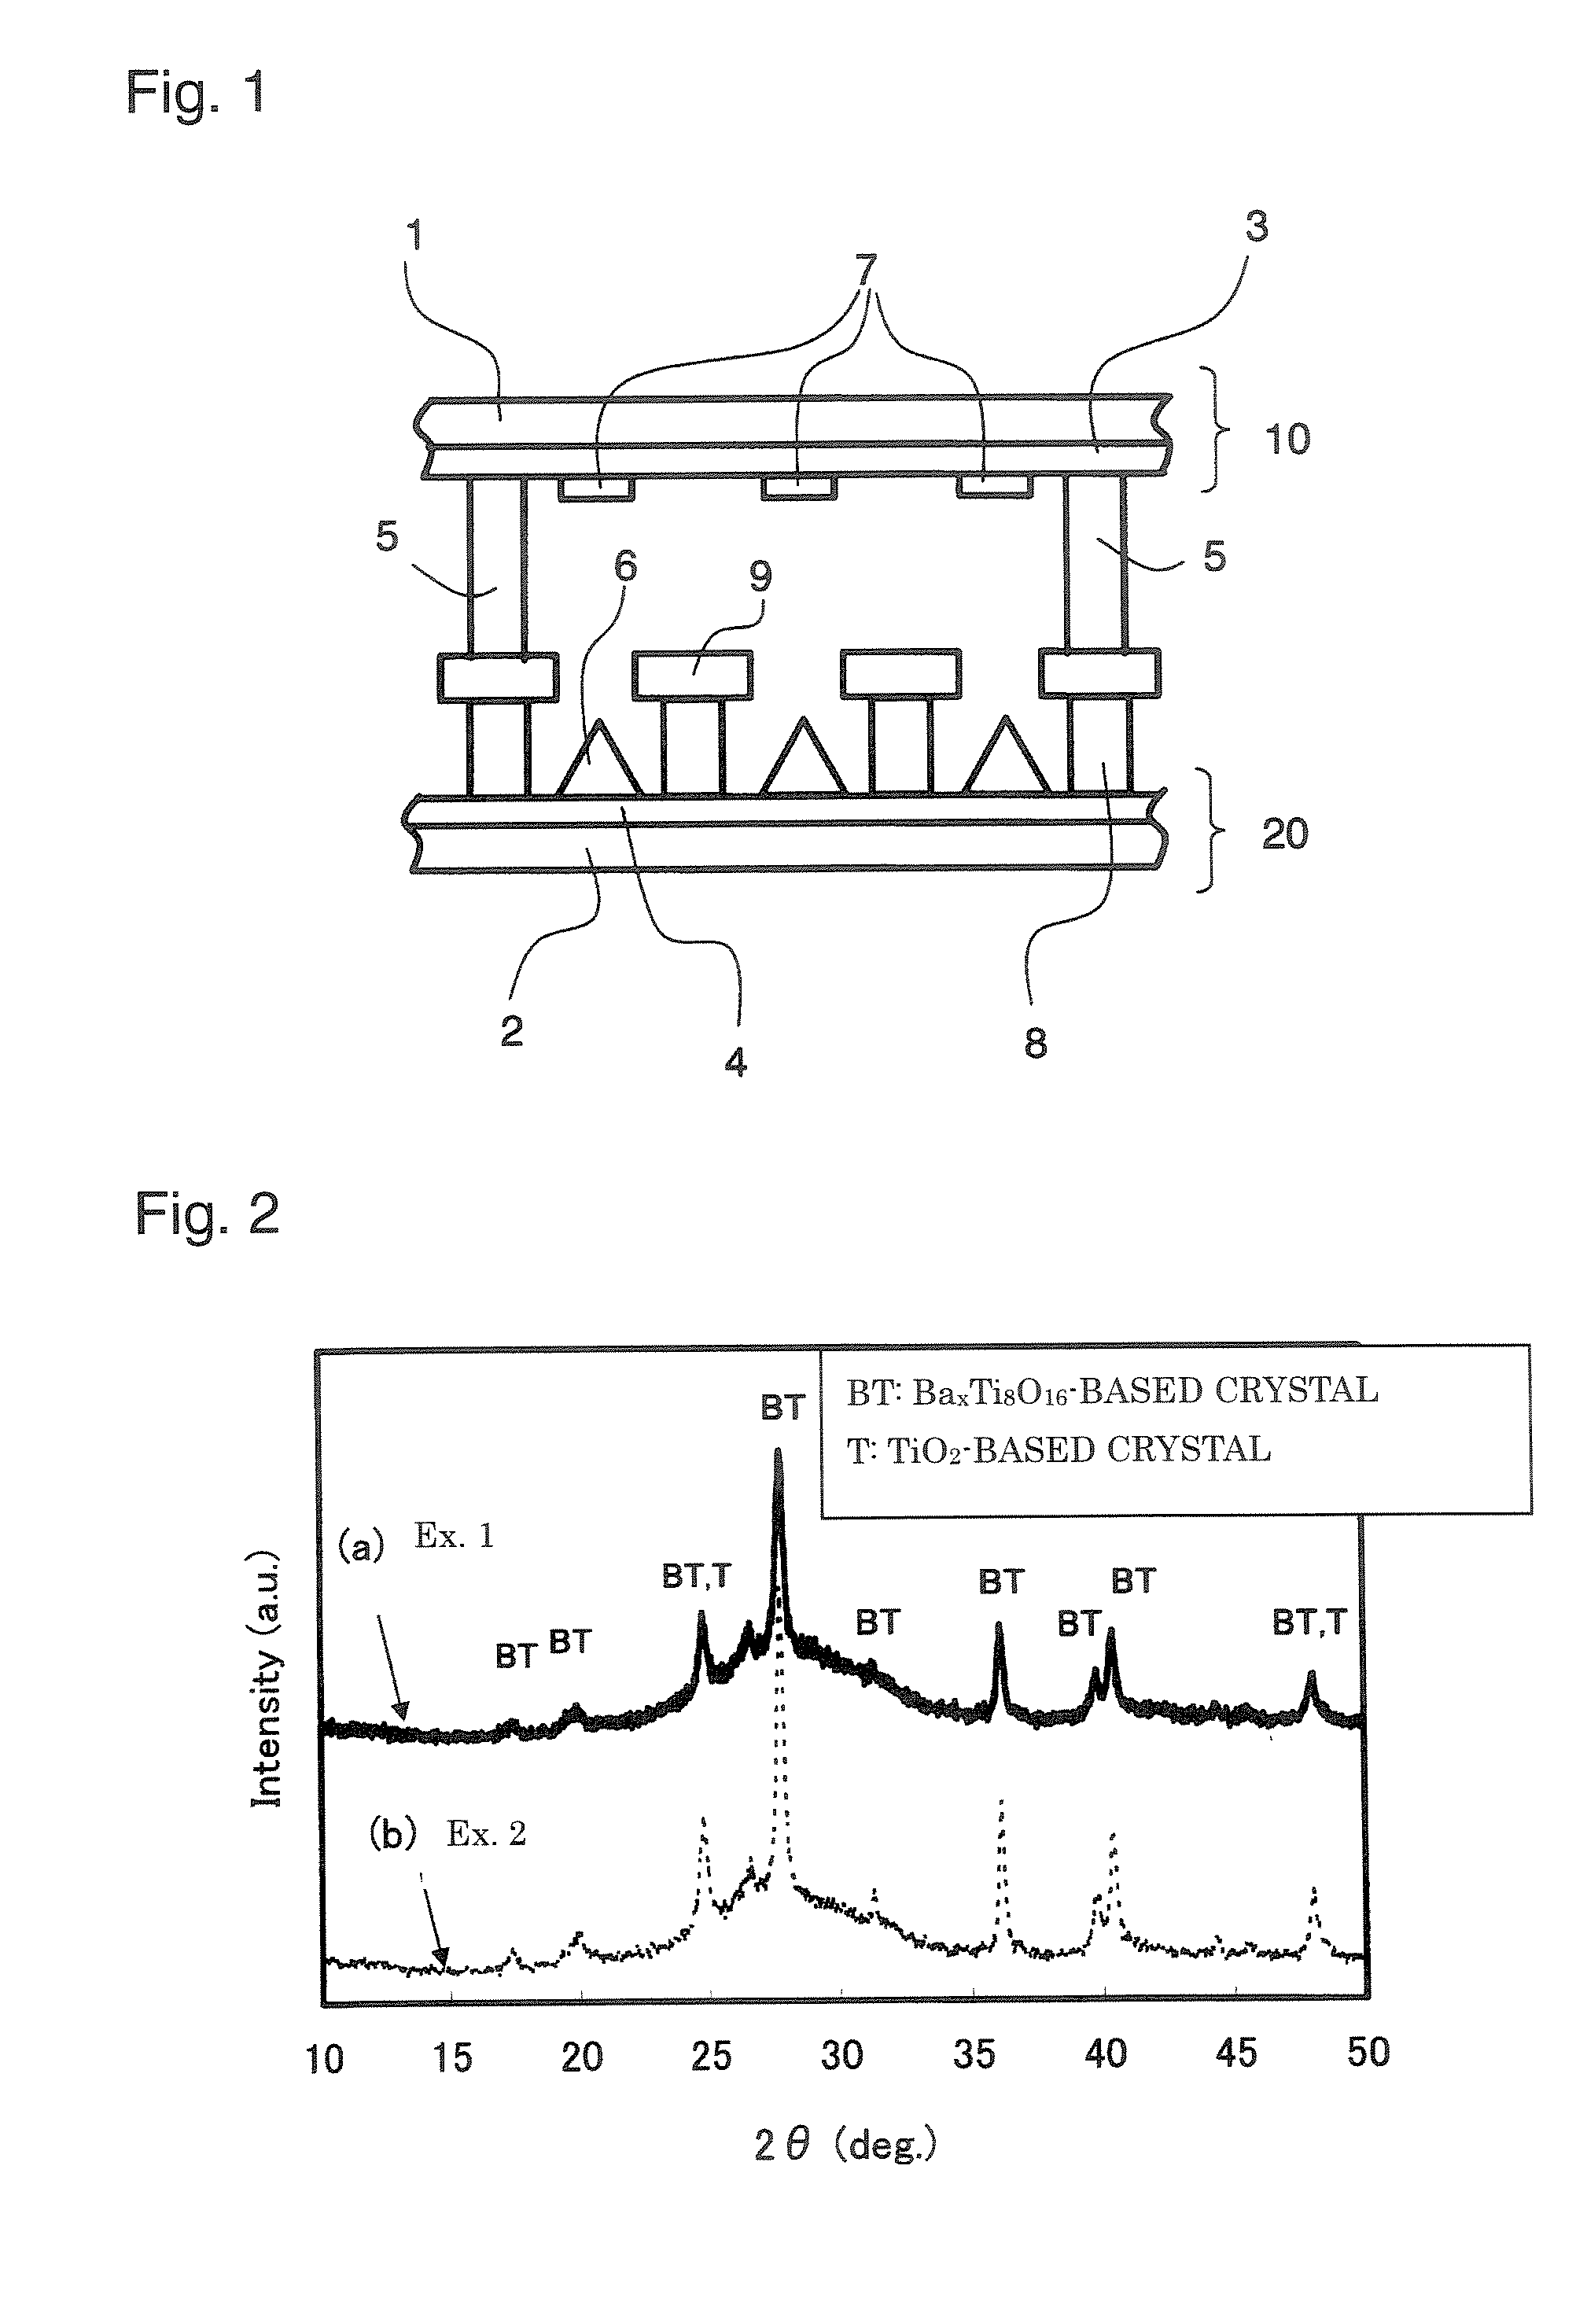 Crystallized glass spacer for field emission display and method its production